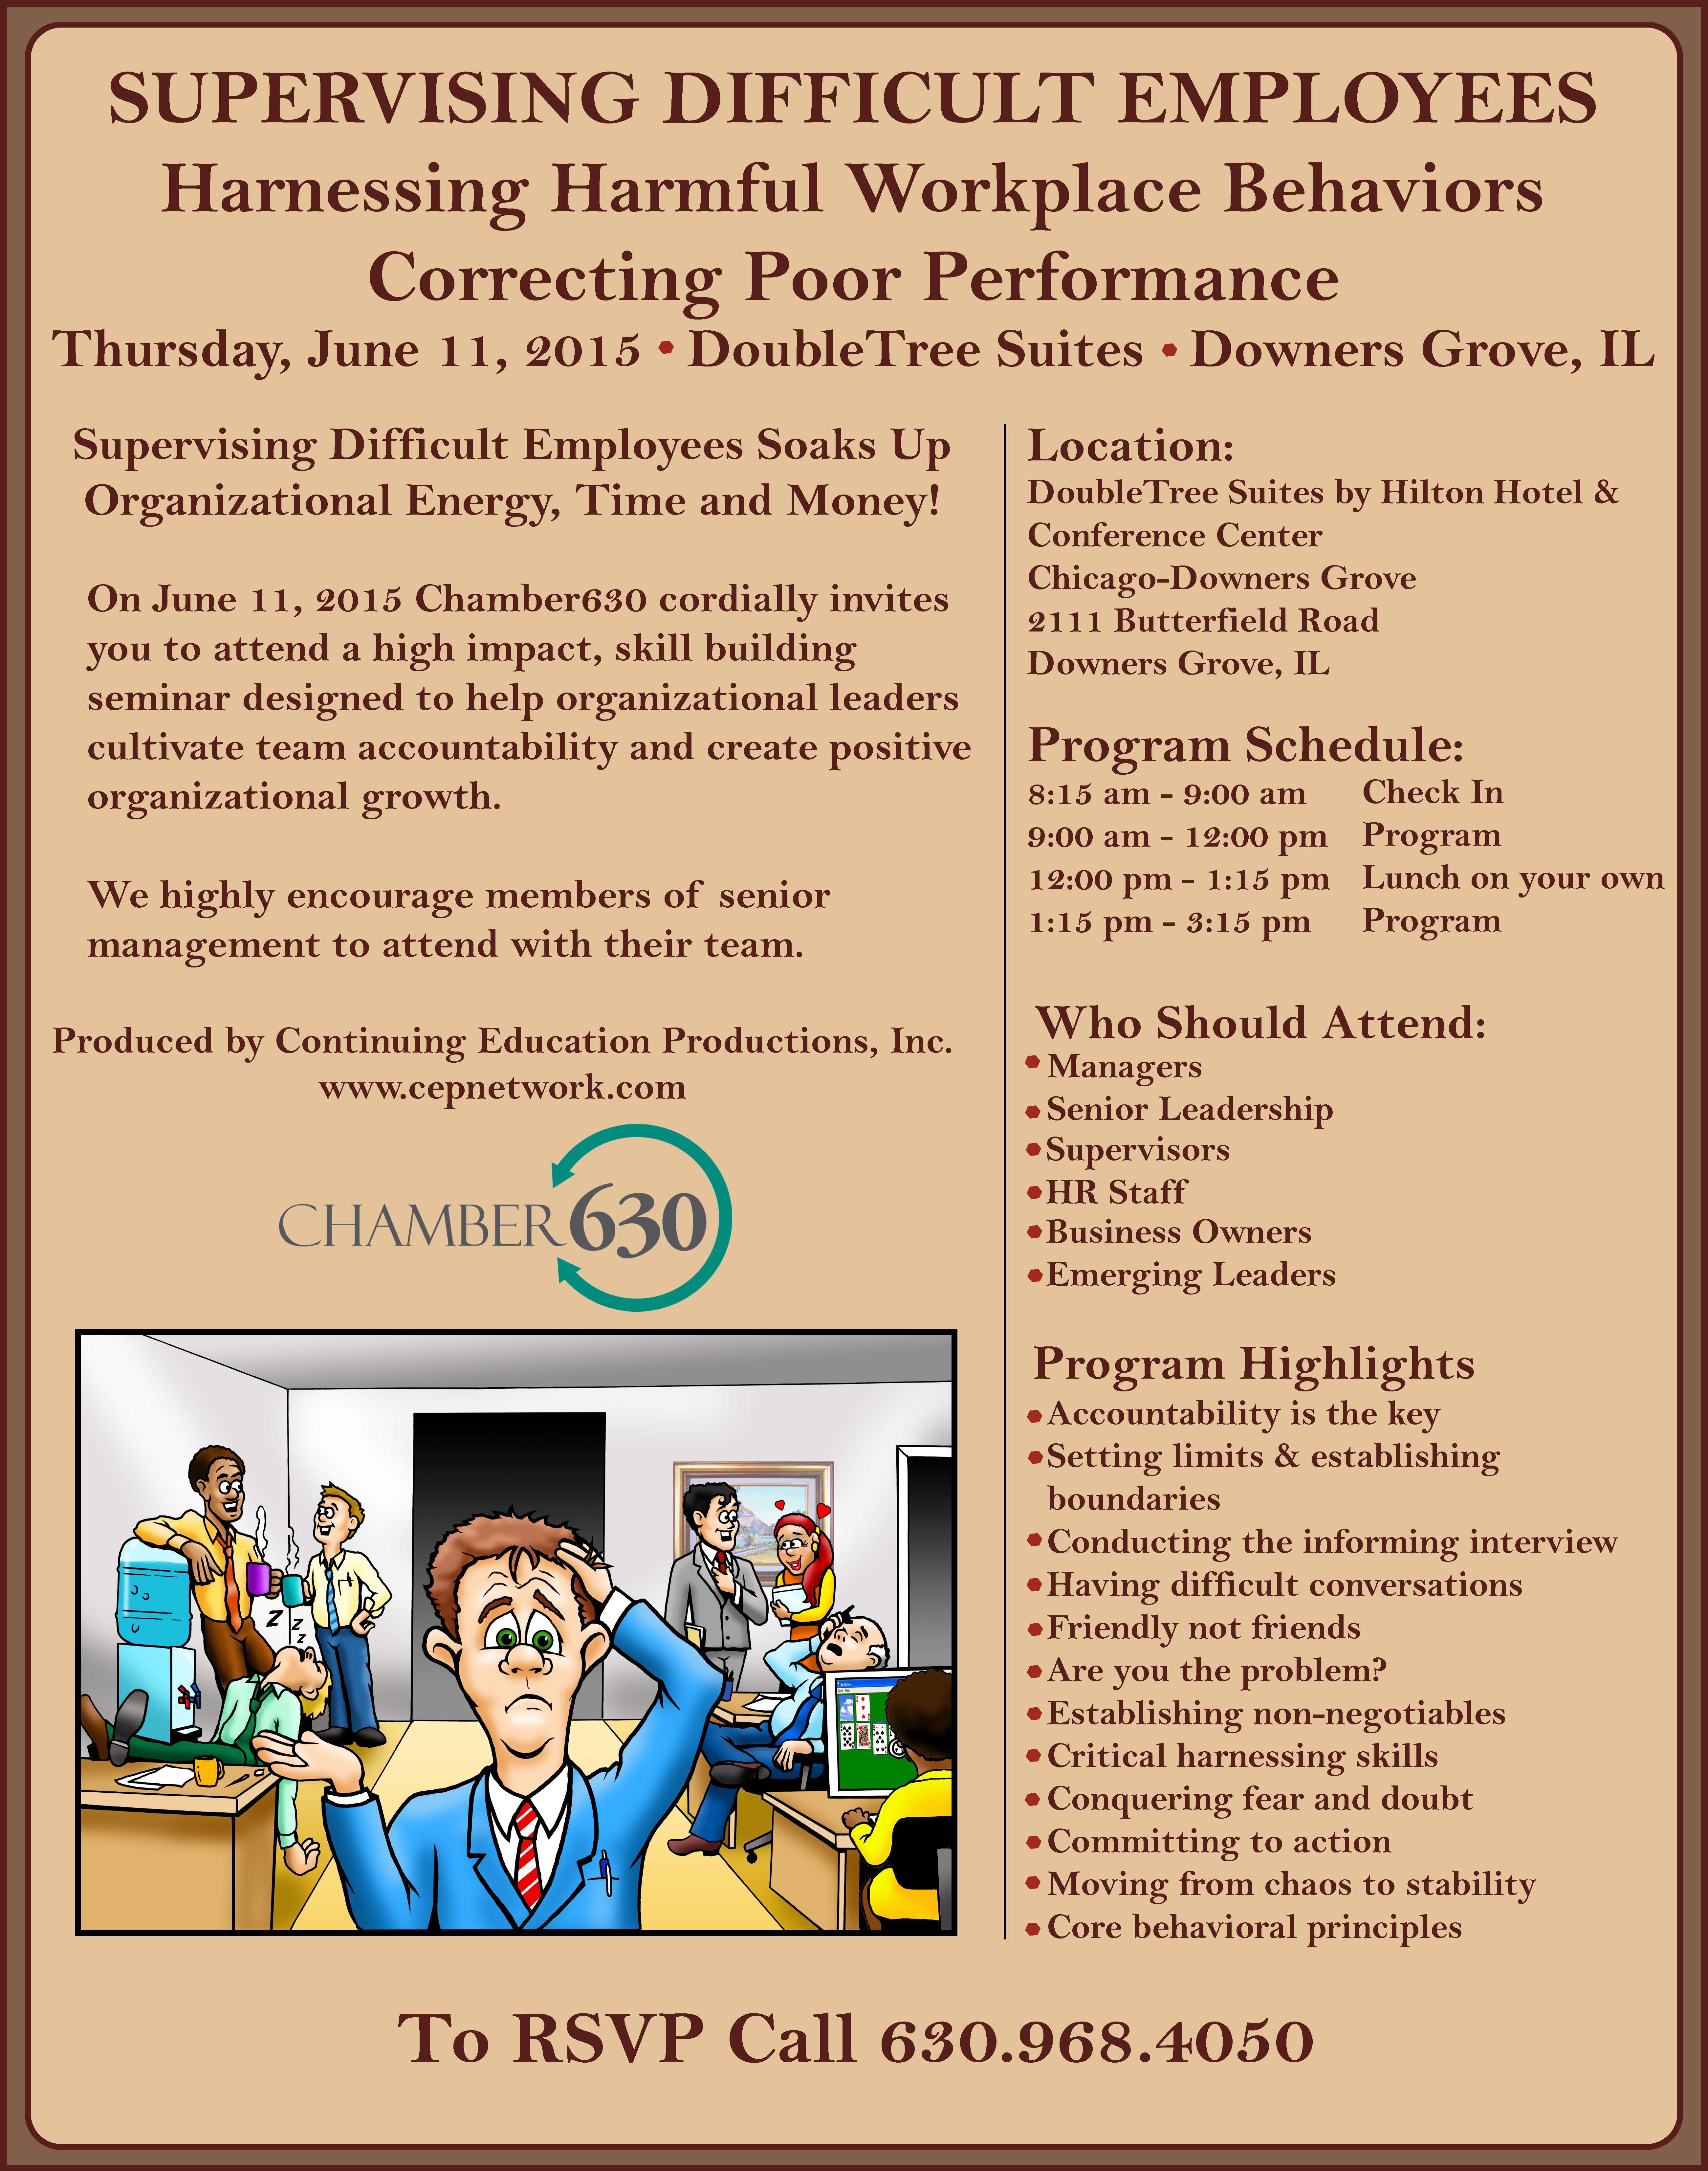 Continuing Education productions flyer Final THIS ONE